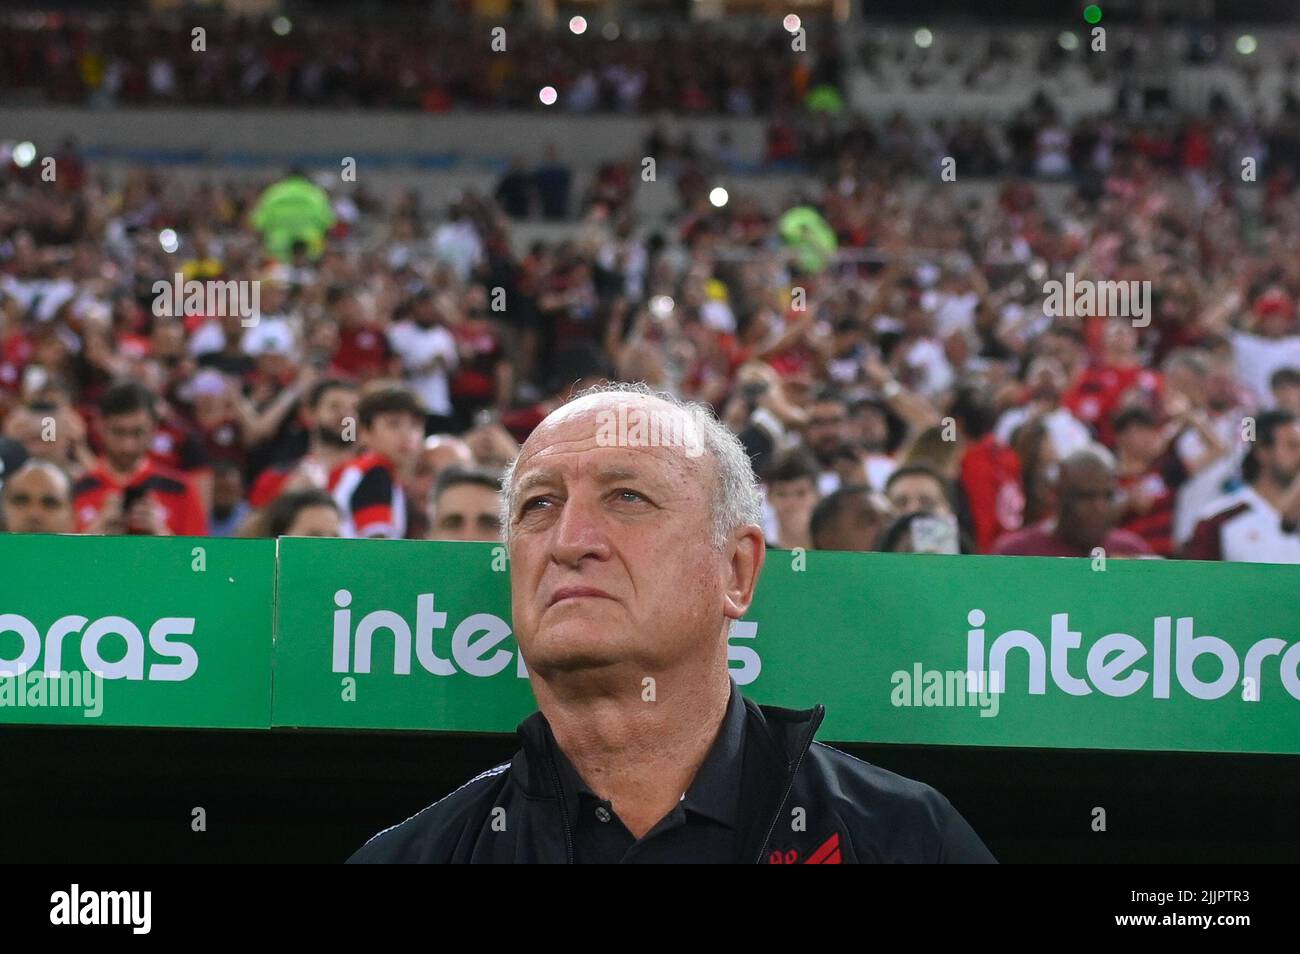 Rio De Janeiro, Brazil. 27th July, 2022. Luiz Felipe Scolari, Coach of Athletico PR, during the Copa do Brasil (Brazilian National League) football match between Flamengo v Athletico PR at the Maracana Stadium in Rio de Janeiro, Brazil, on July 27, 2022. (Foto: Andre Borges/Sports Press Photo/C - ONE HOUR DEADLINE - ONLY ACTIVATE FTP IF IMAGES LESS THAN ONE HOUR OLD - Alamy) Credit: SPP Sport Press Photo. /Alamy Live News Stock Photo